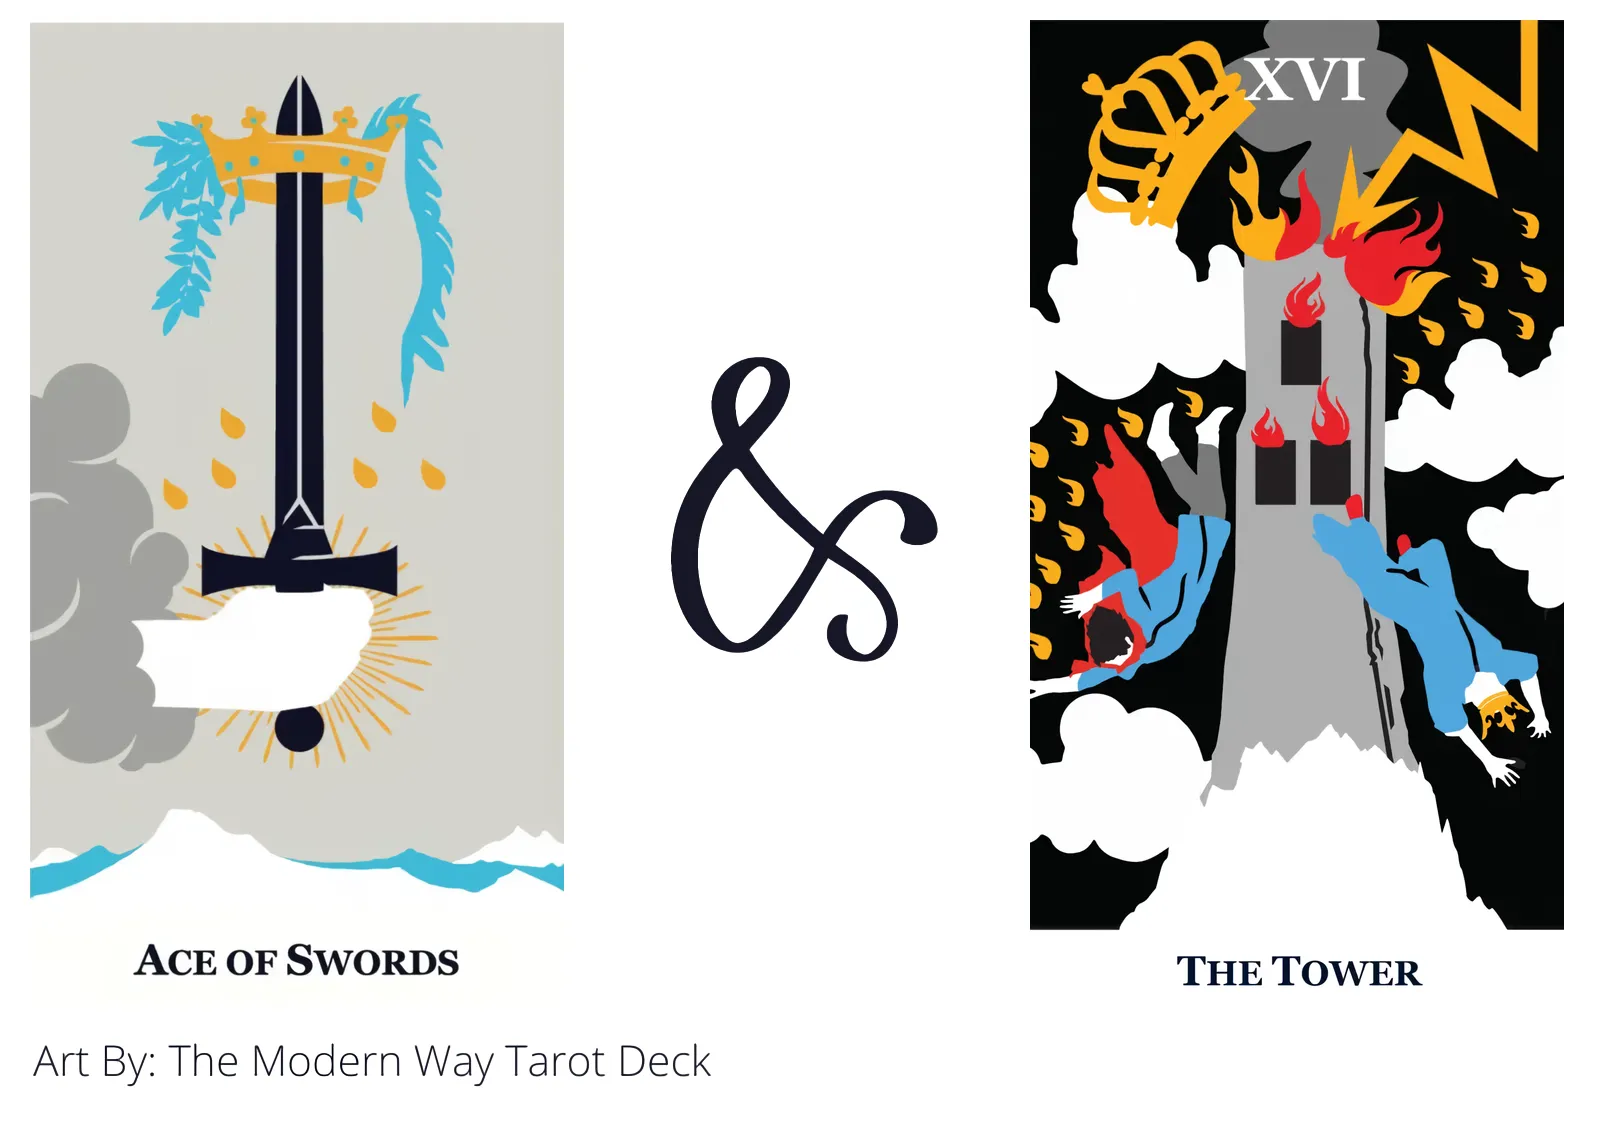 ace of swords and the tower tarot cards together